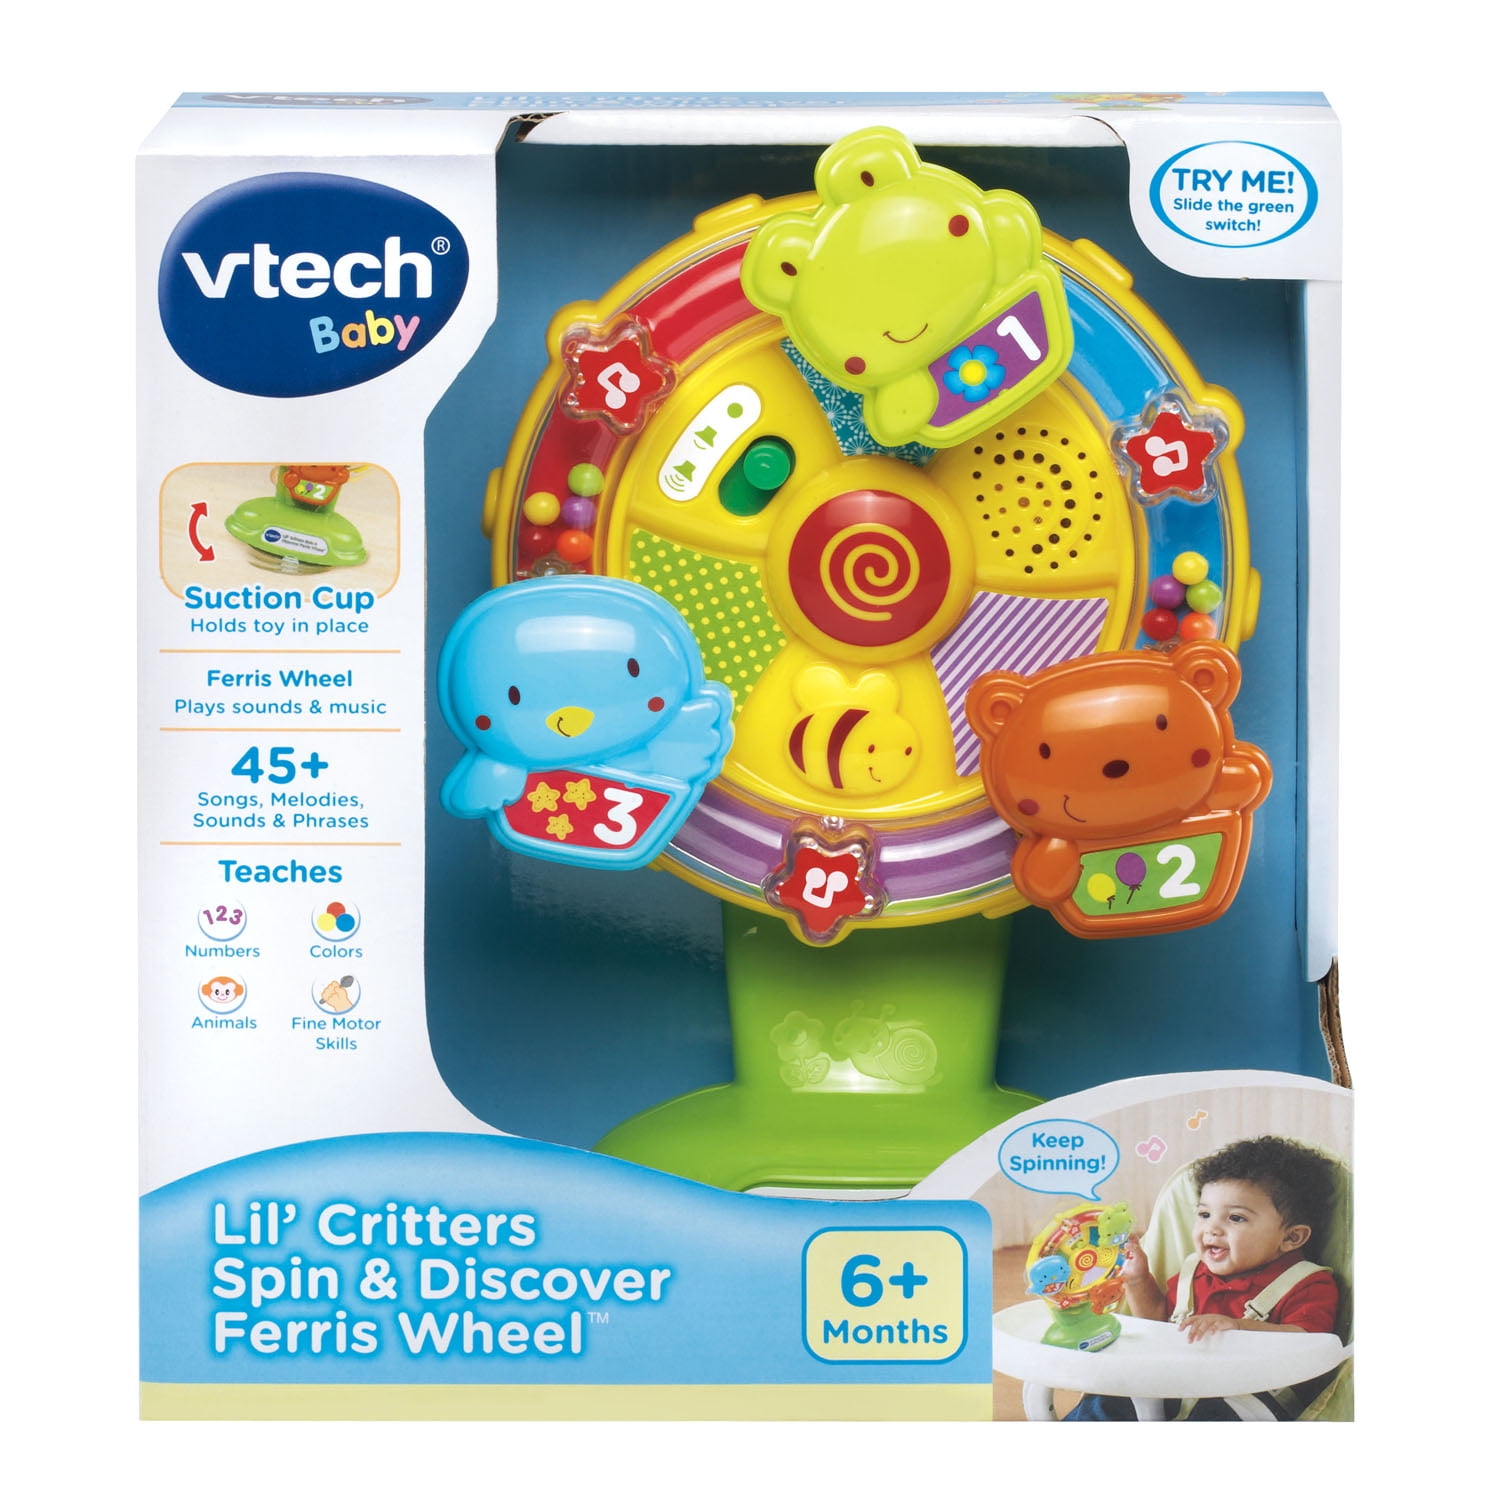 VTech Baby Lil' Critters Spin and Discover Ferris Wheel Toy For Kids 